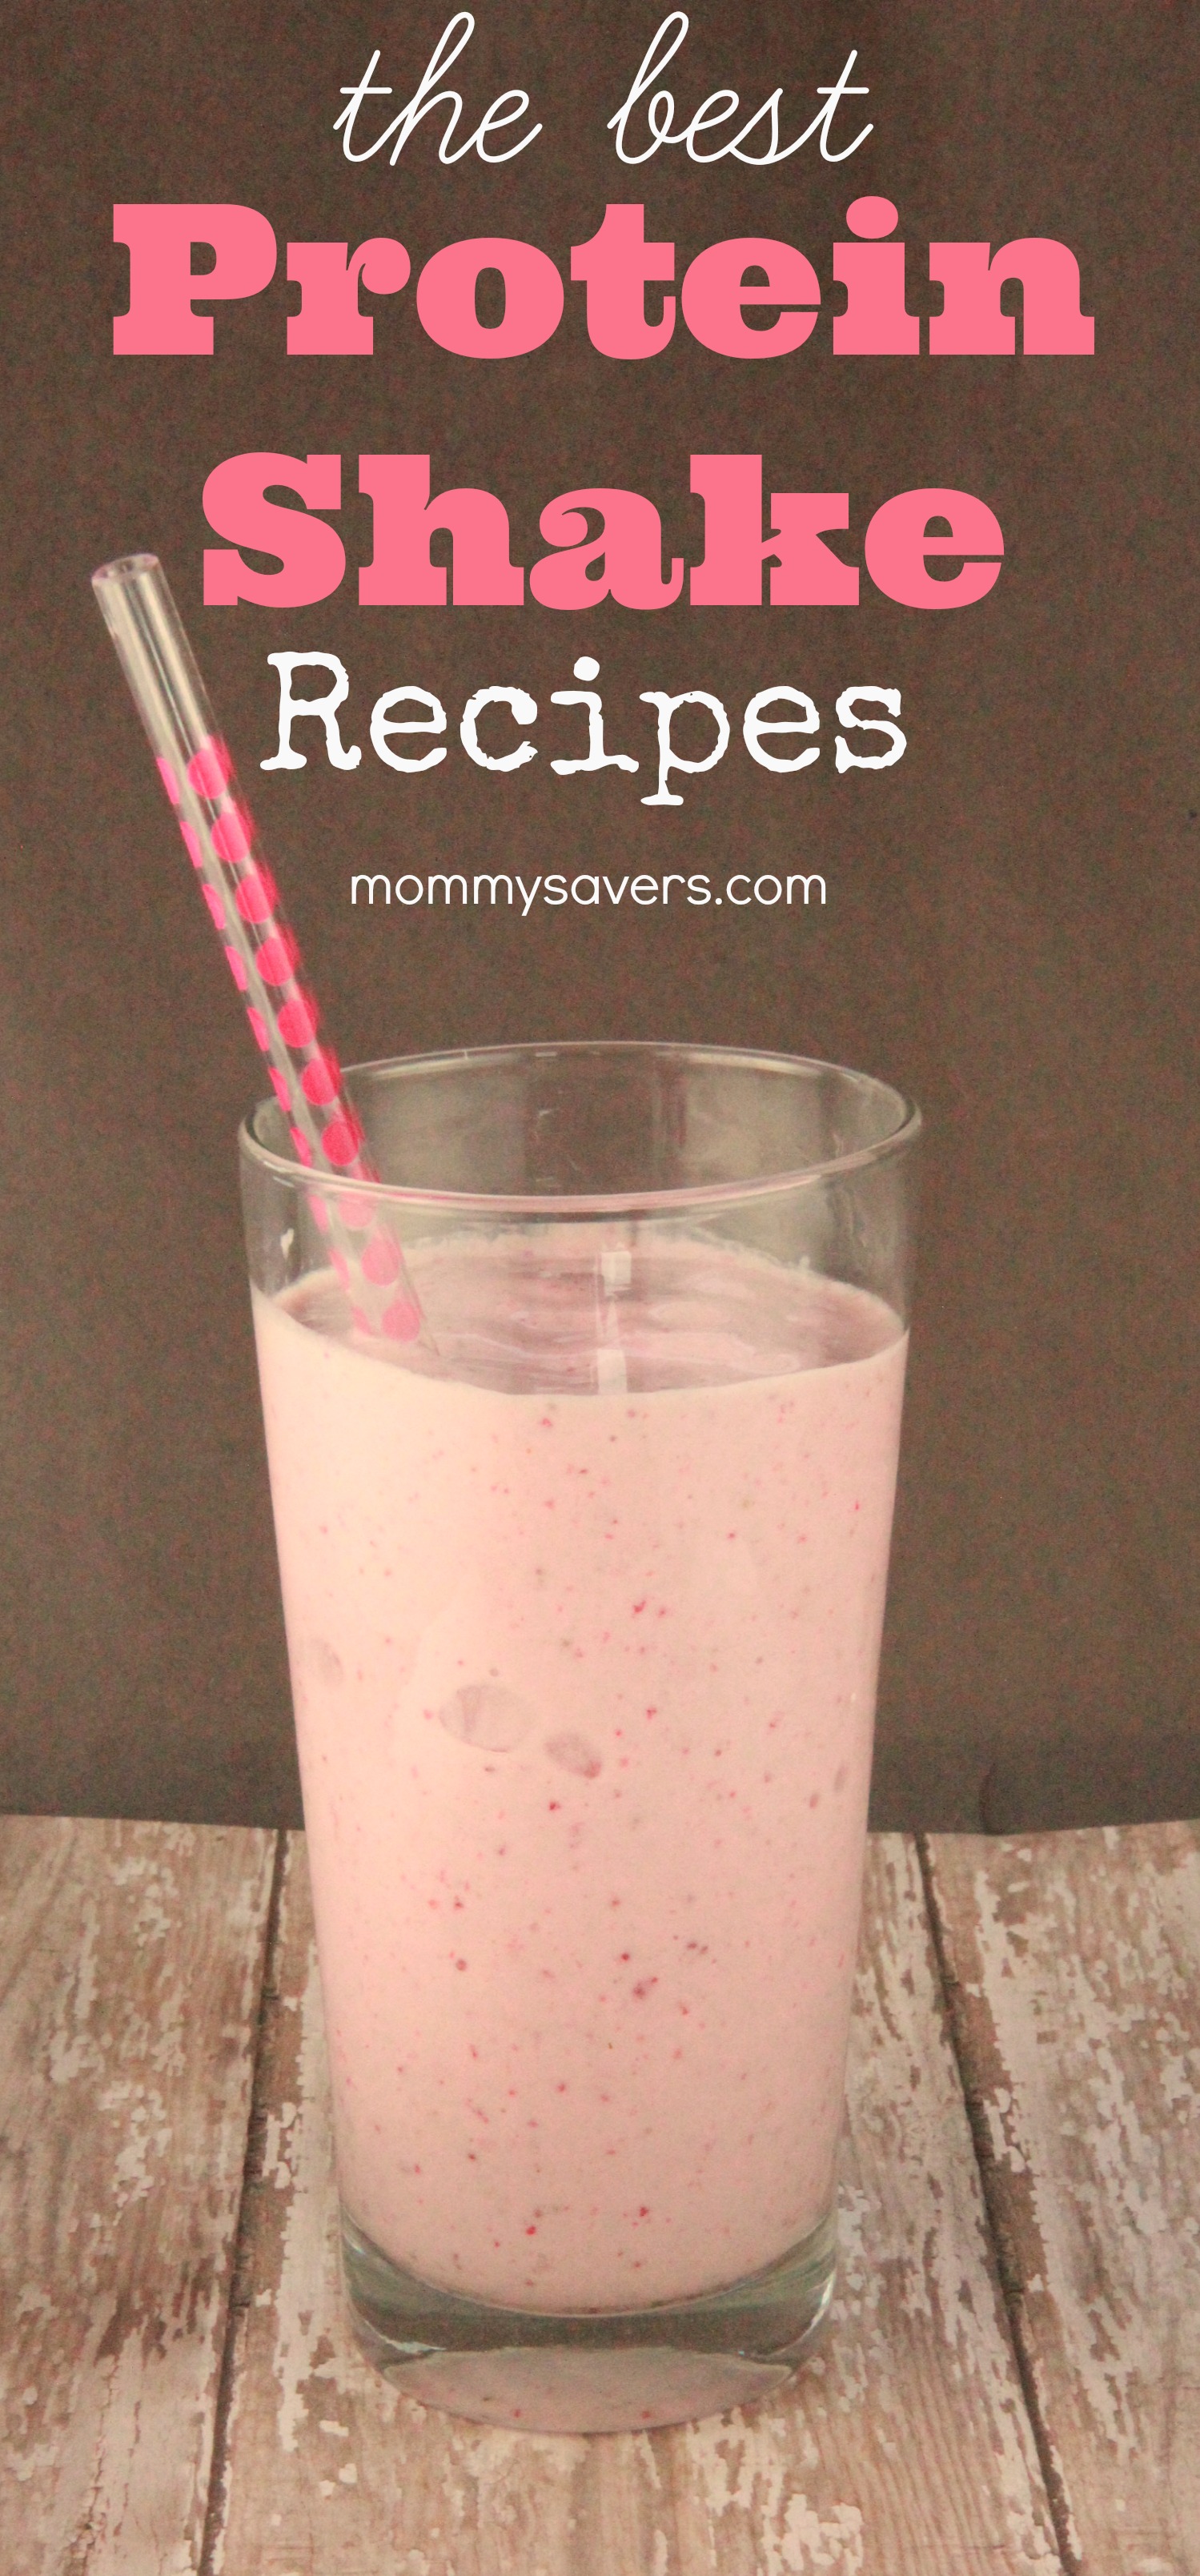 Best Protein Shake Recipes - Mommysavers